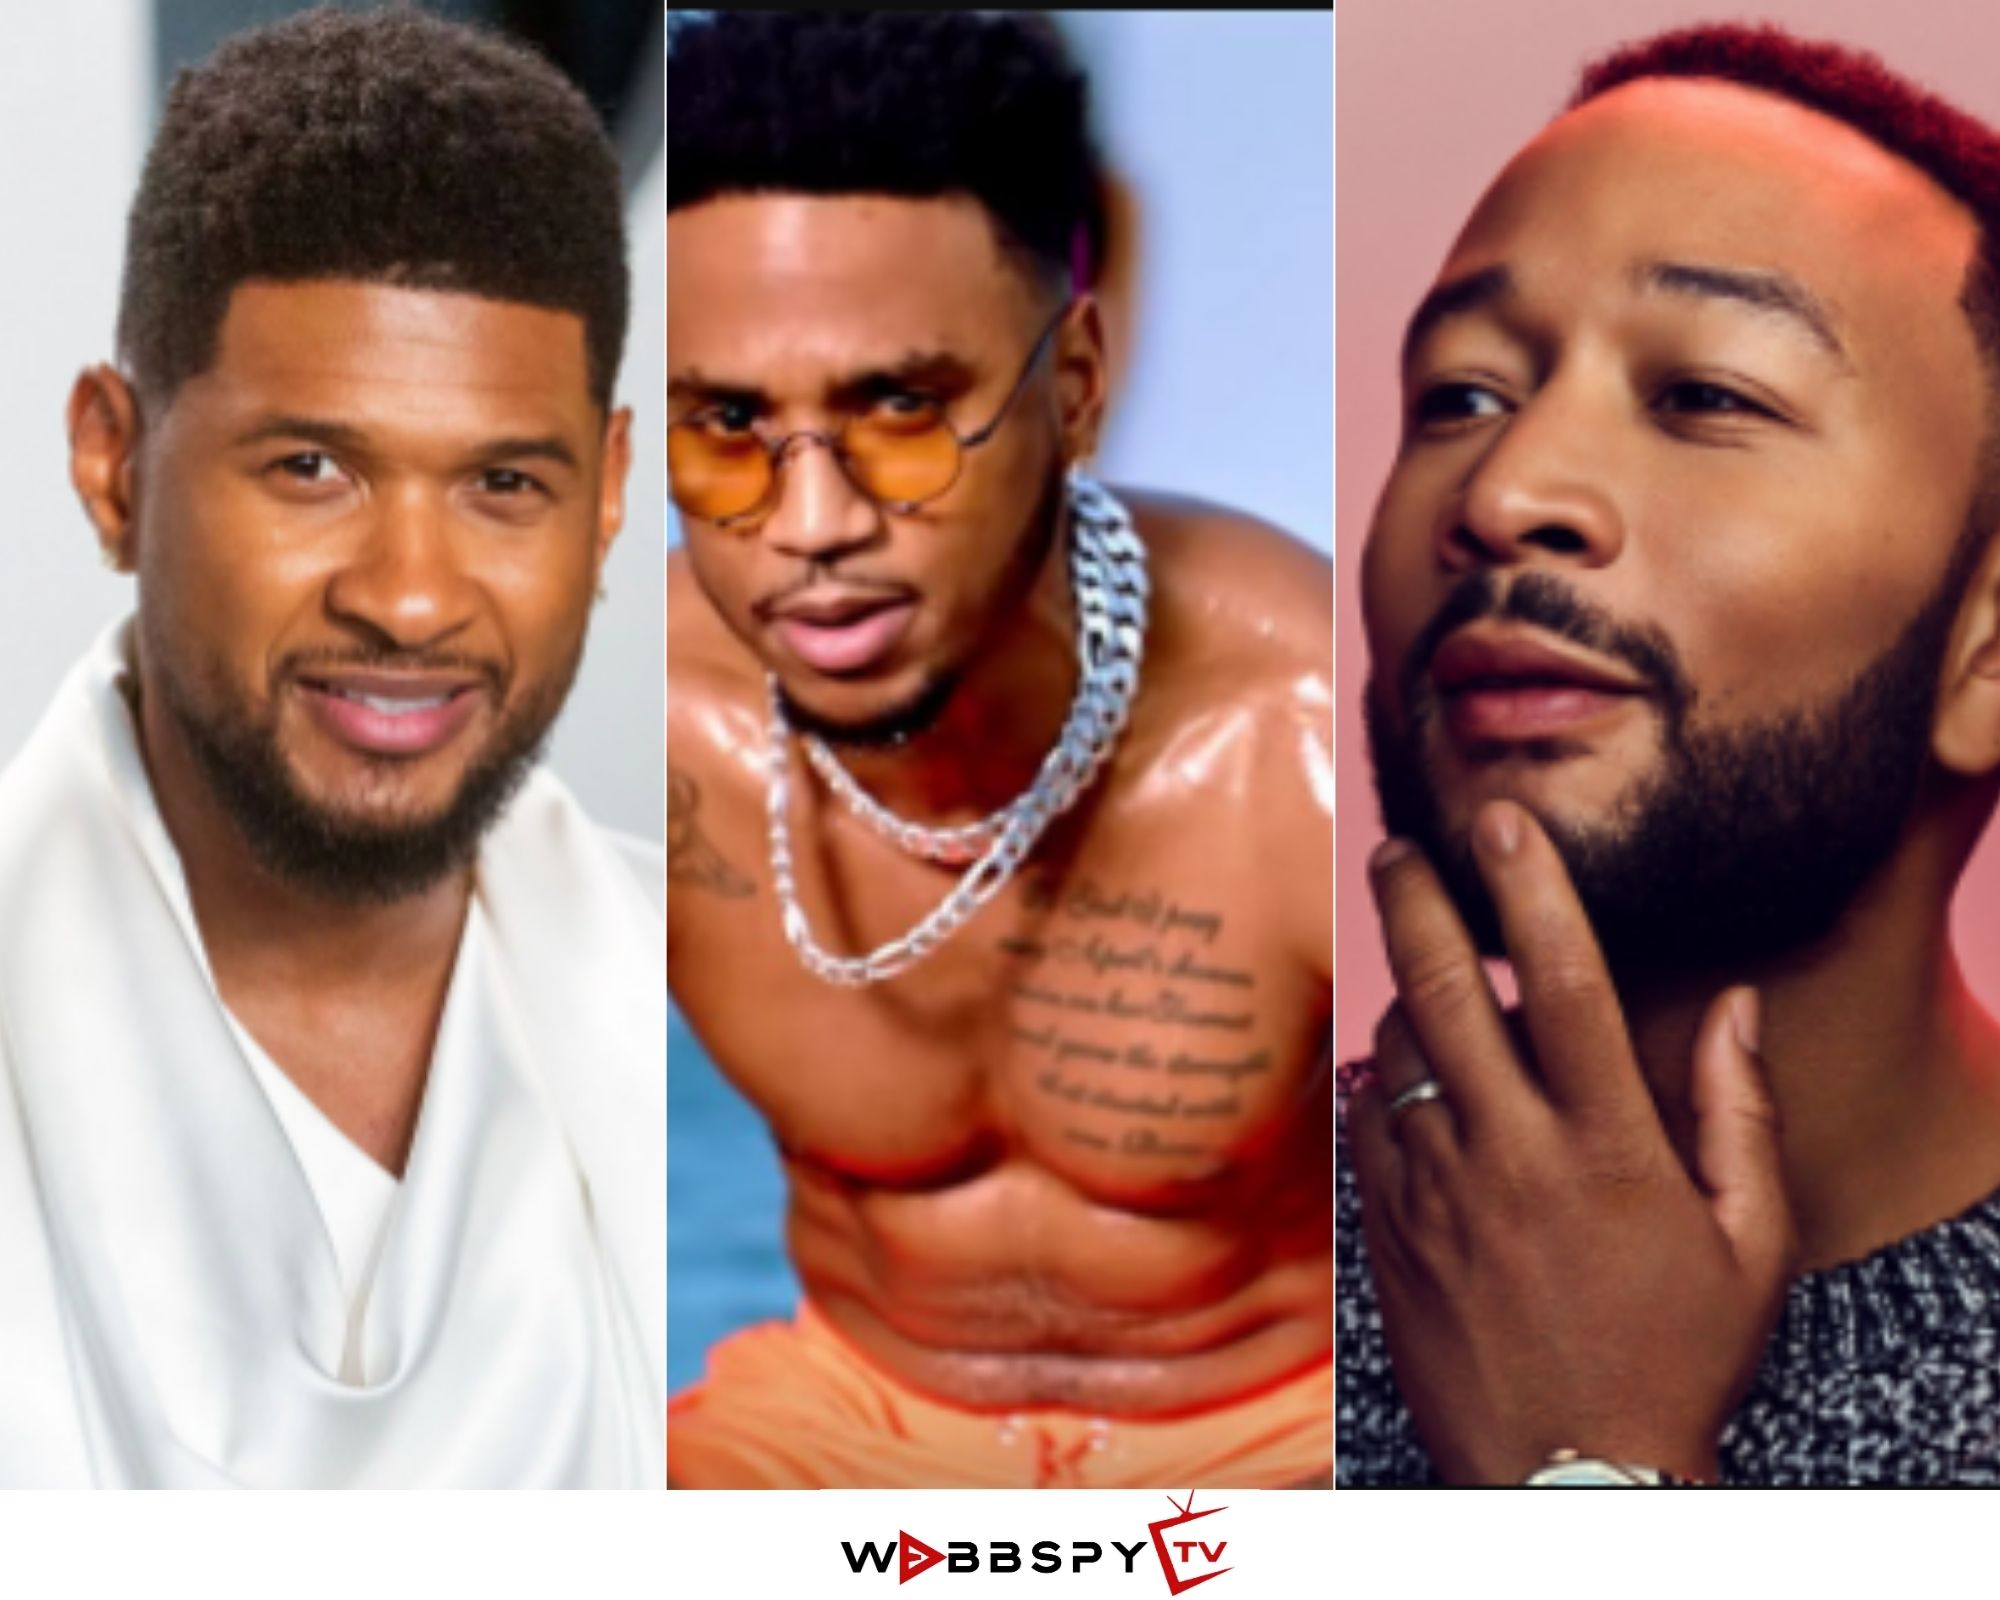 Top 10 Hottest Black Male Singers In The World 2021